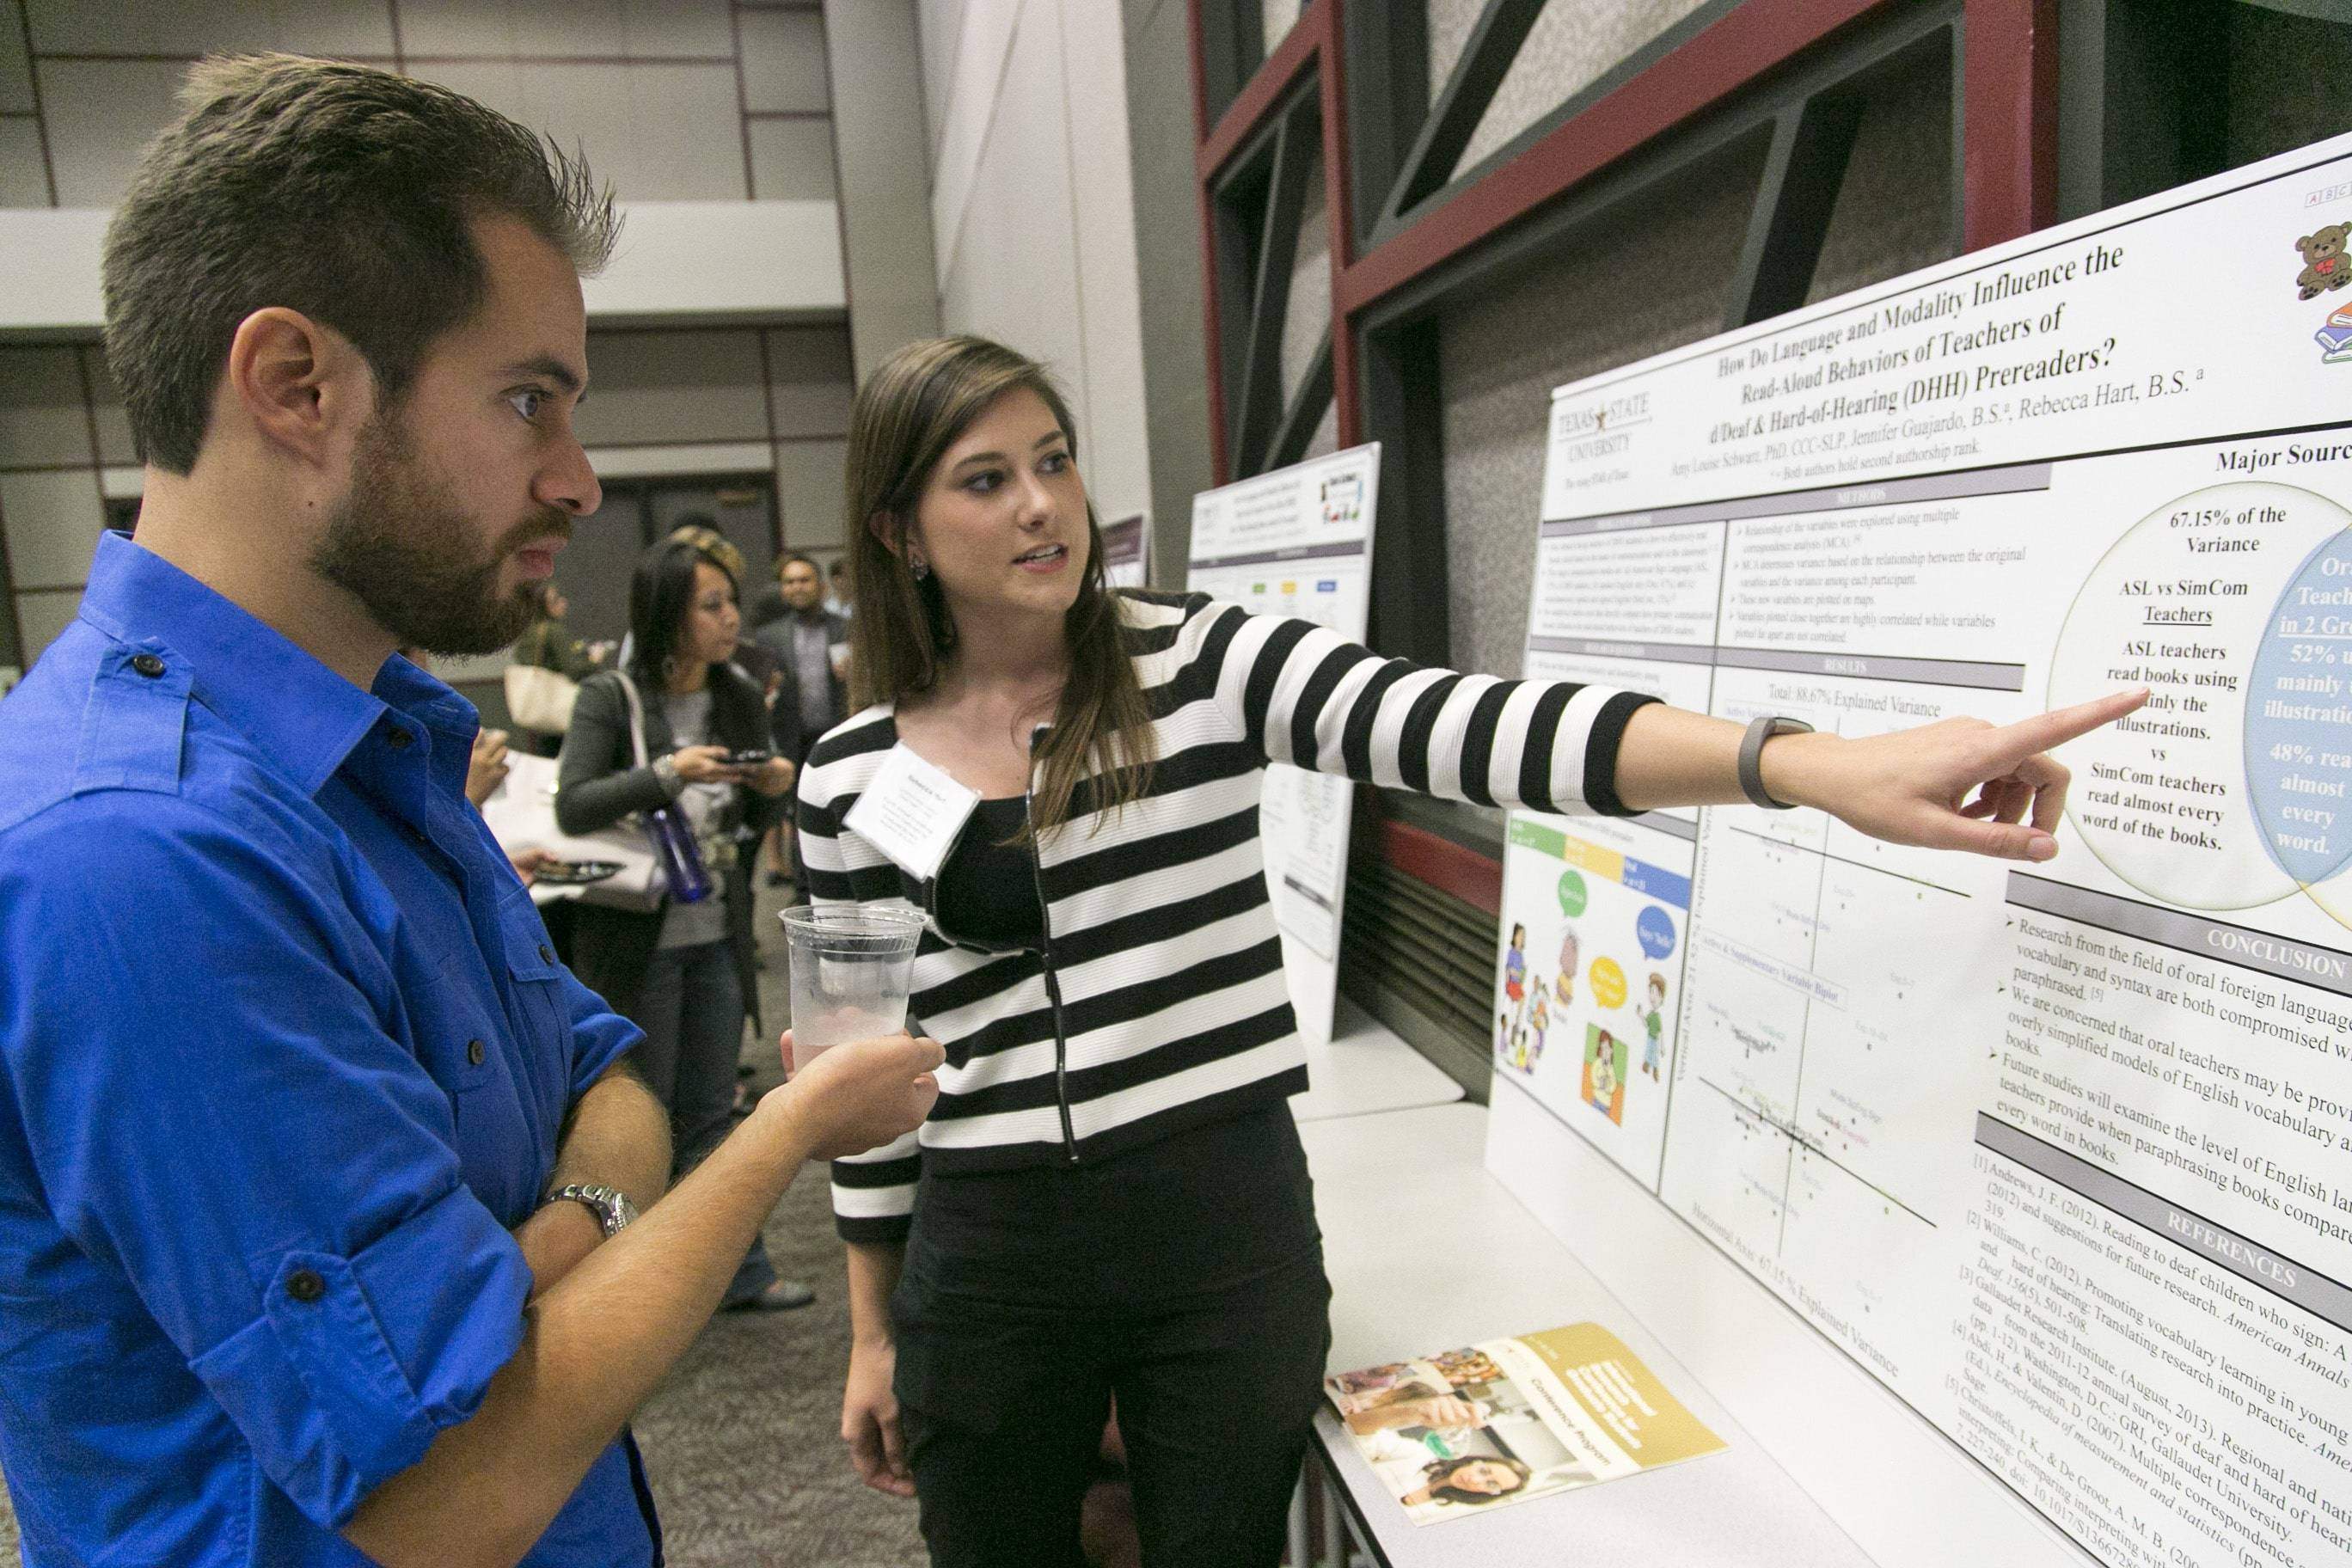 A female student points to her research poster while explaining her work to a male student.